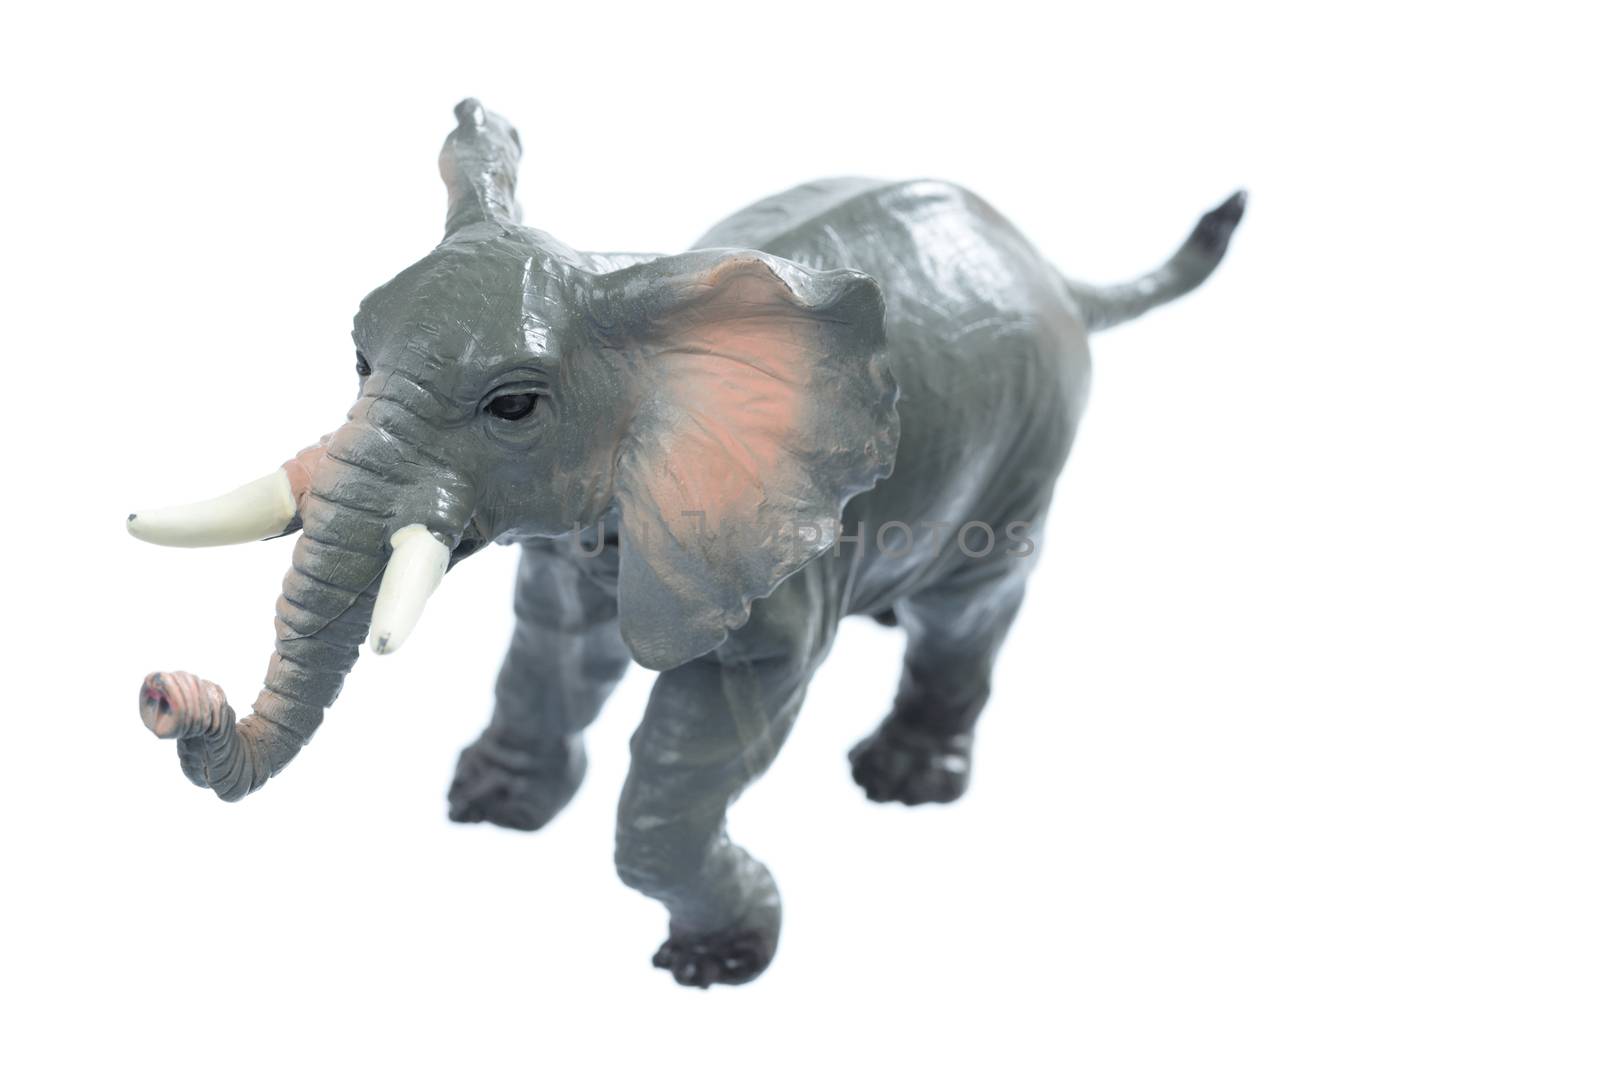 A small toy elephant isolated on a white background.